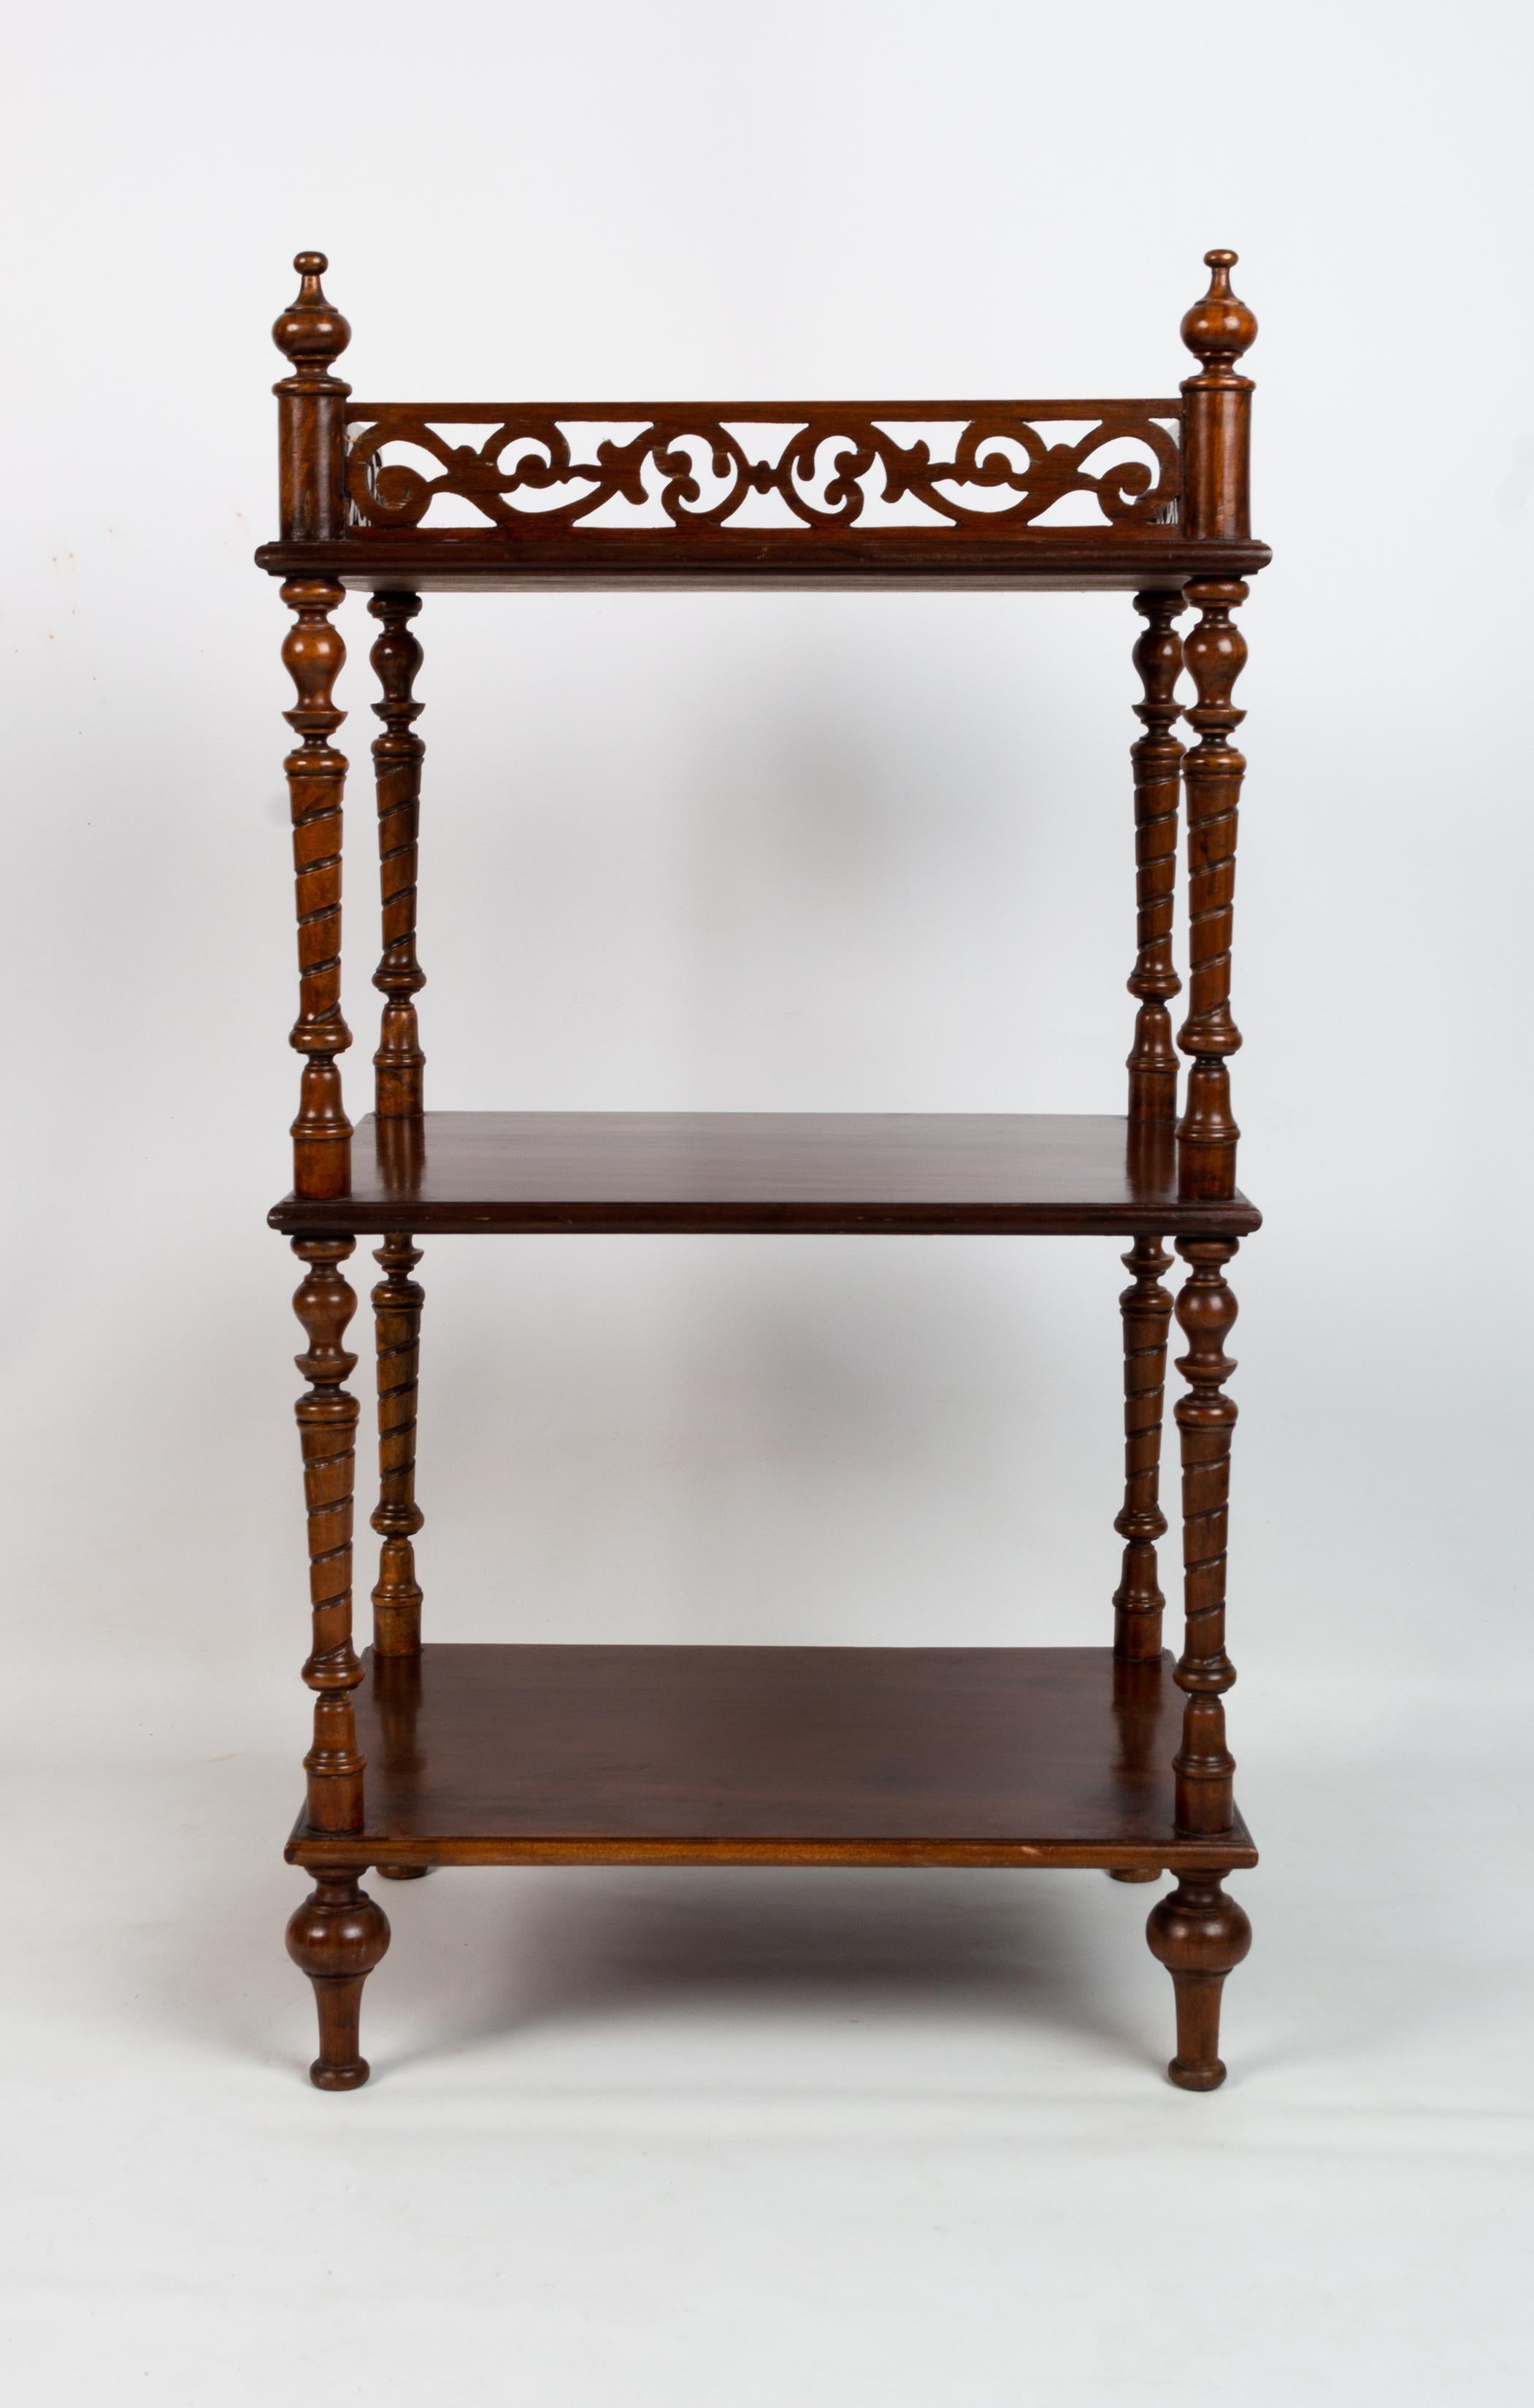 Antique English Victorian Carved Mahogany Whatnot Etagere Shelves C.1880 In Good Condition For Sale In London, GB